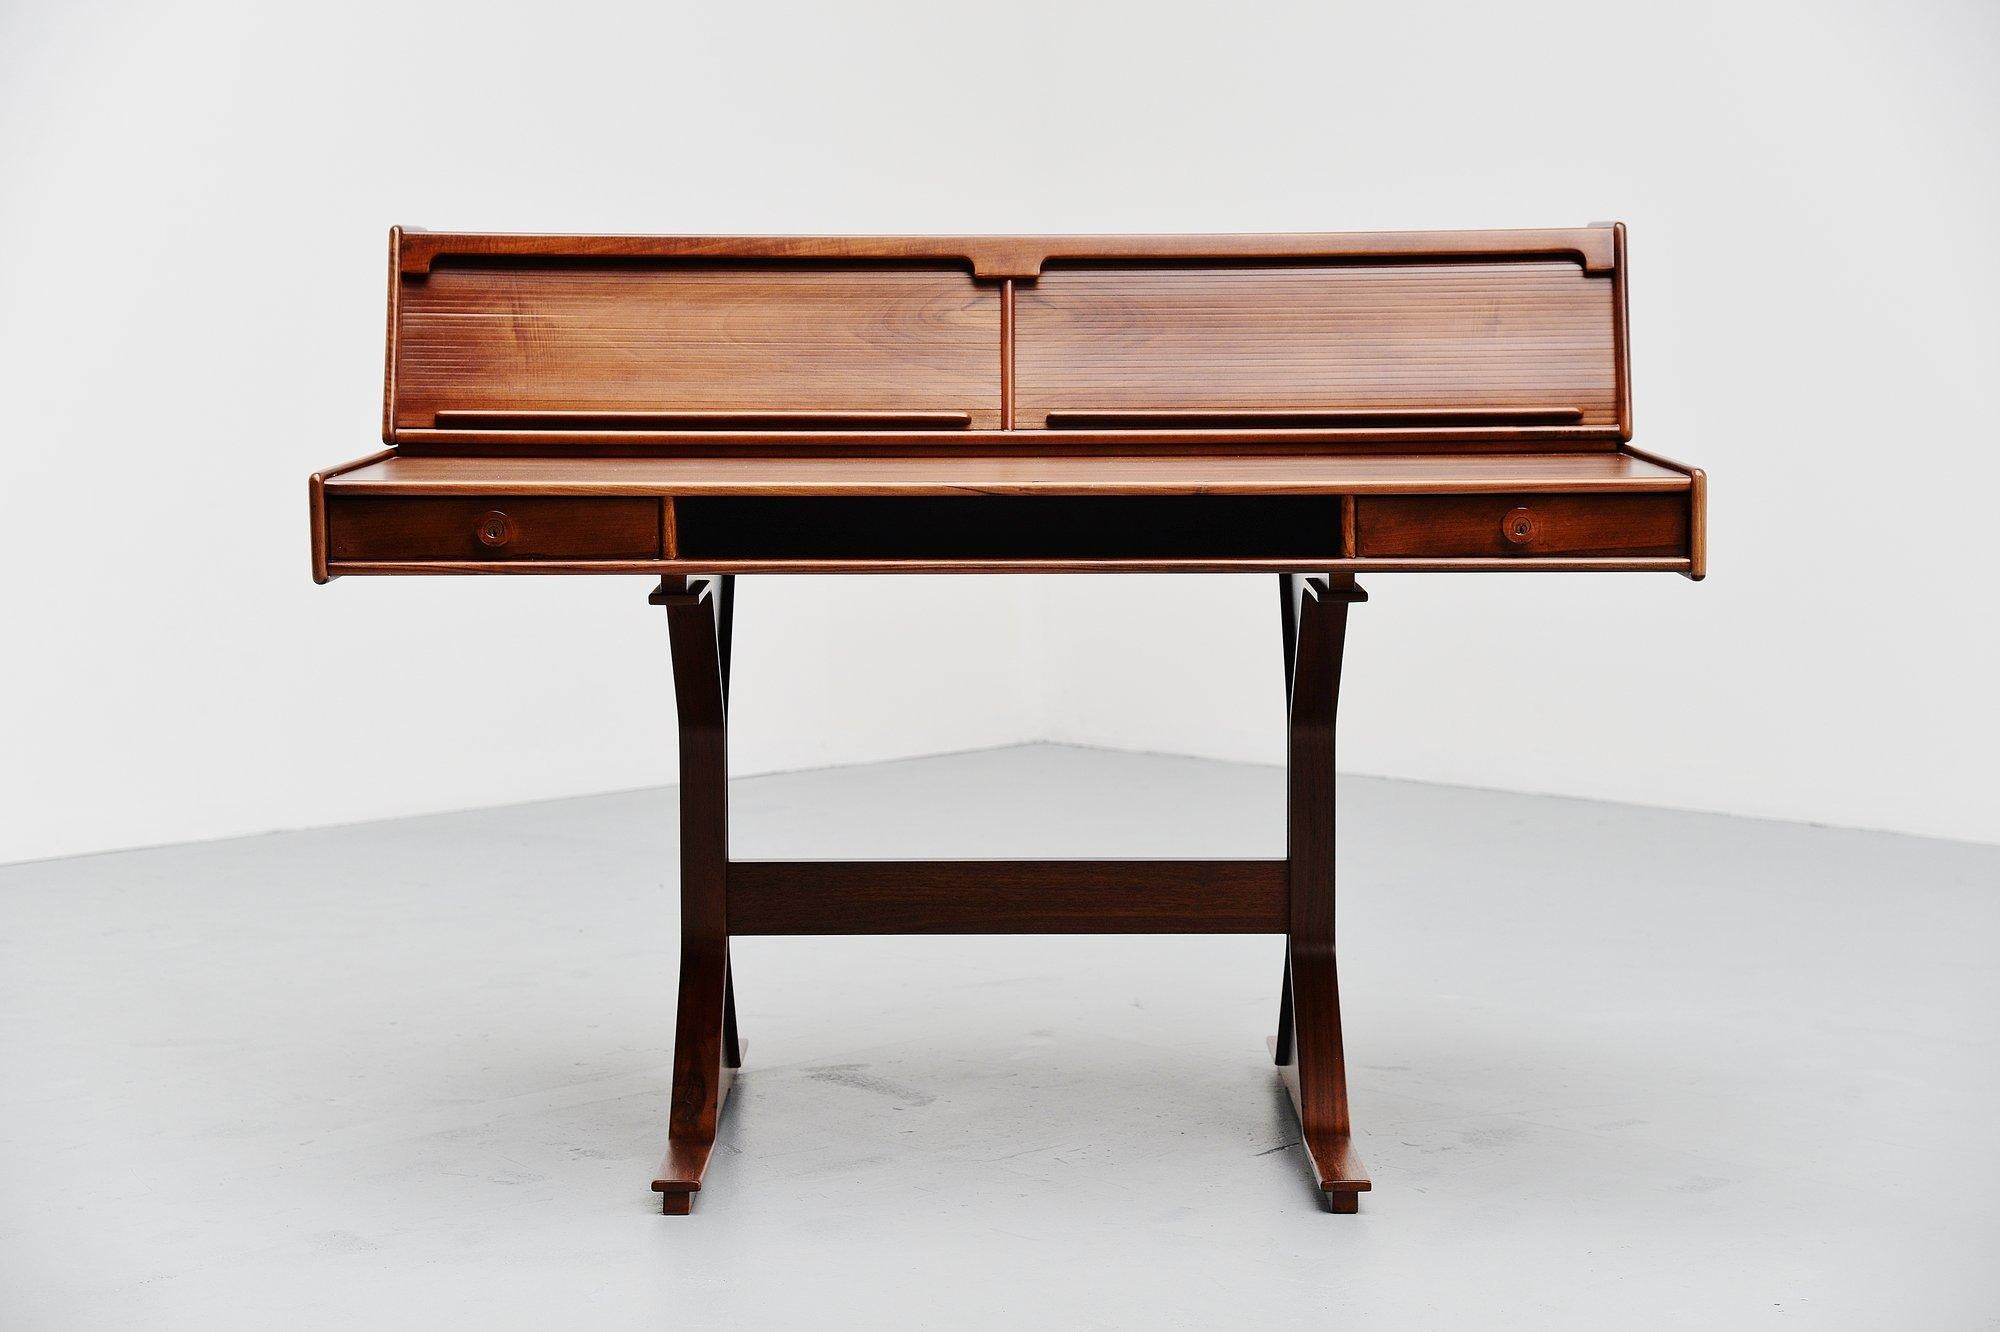 Fantastic Italian writing desk model 530 designed by Gianfranco Frattini and manufactured by Bernini, Italy 1957. This desk is made of nicely grained walnut veneer and has its optional storage unit on top which makes this desk look amazing and